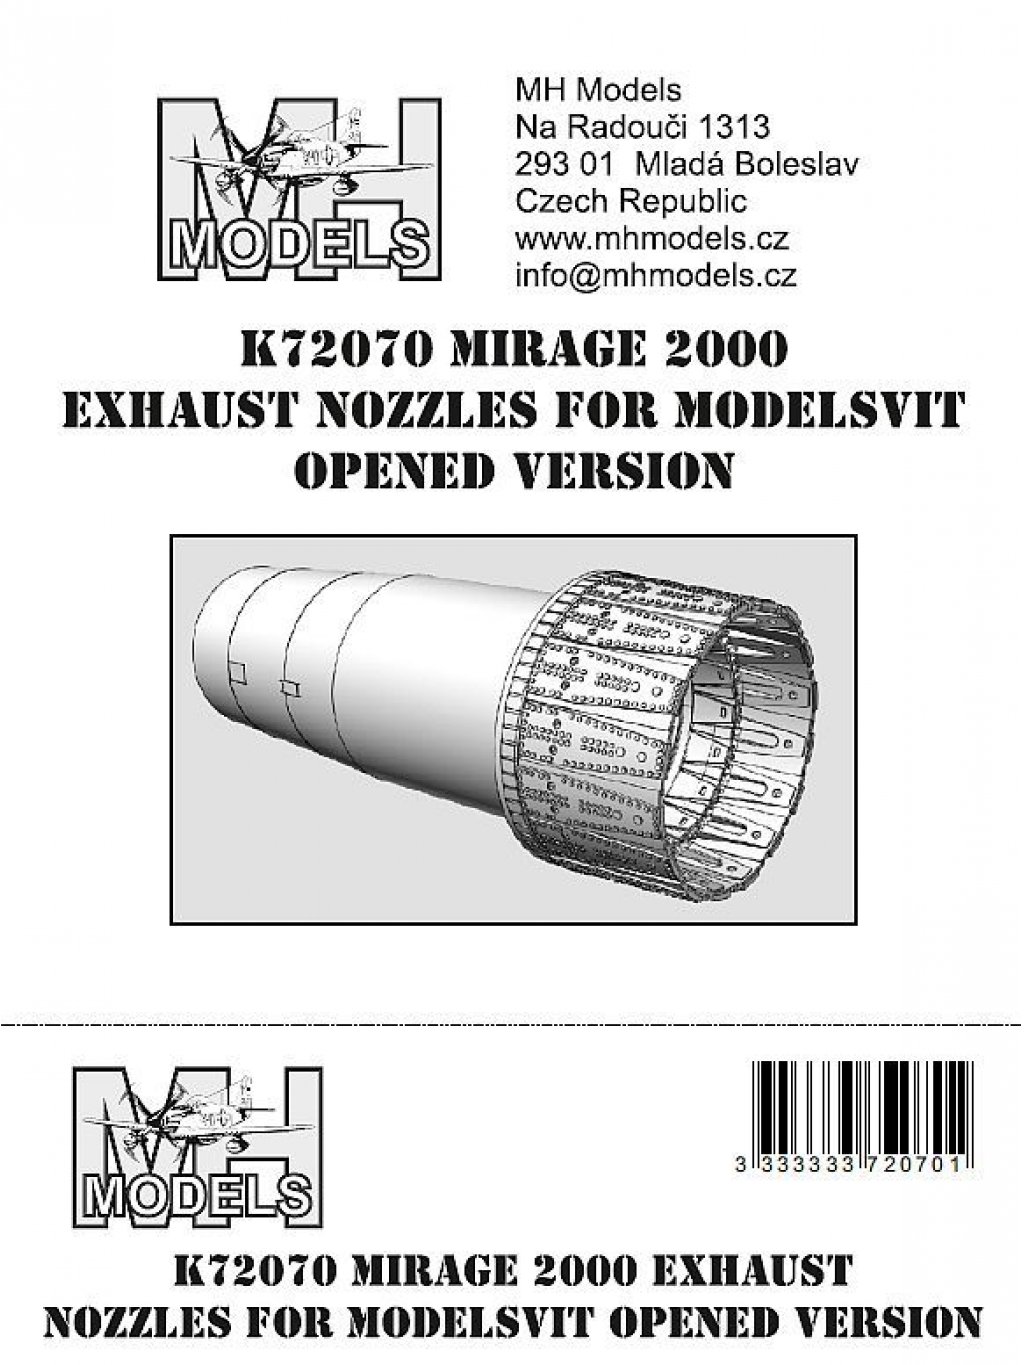 Mirage 2000 exhaust nozzles for Modelsvit opened version